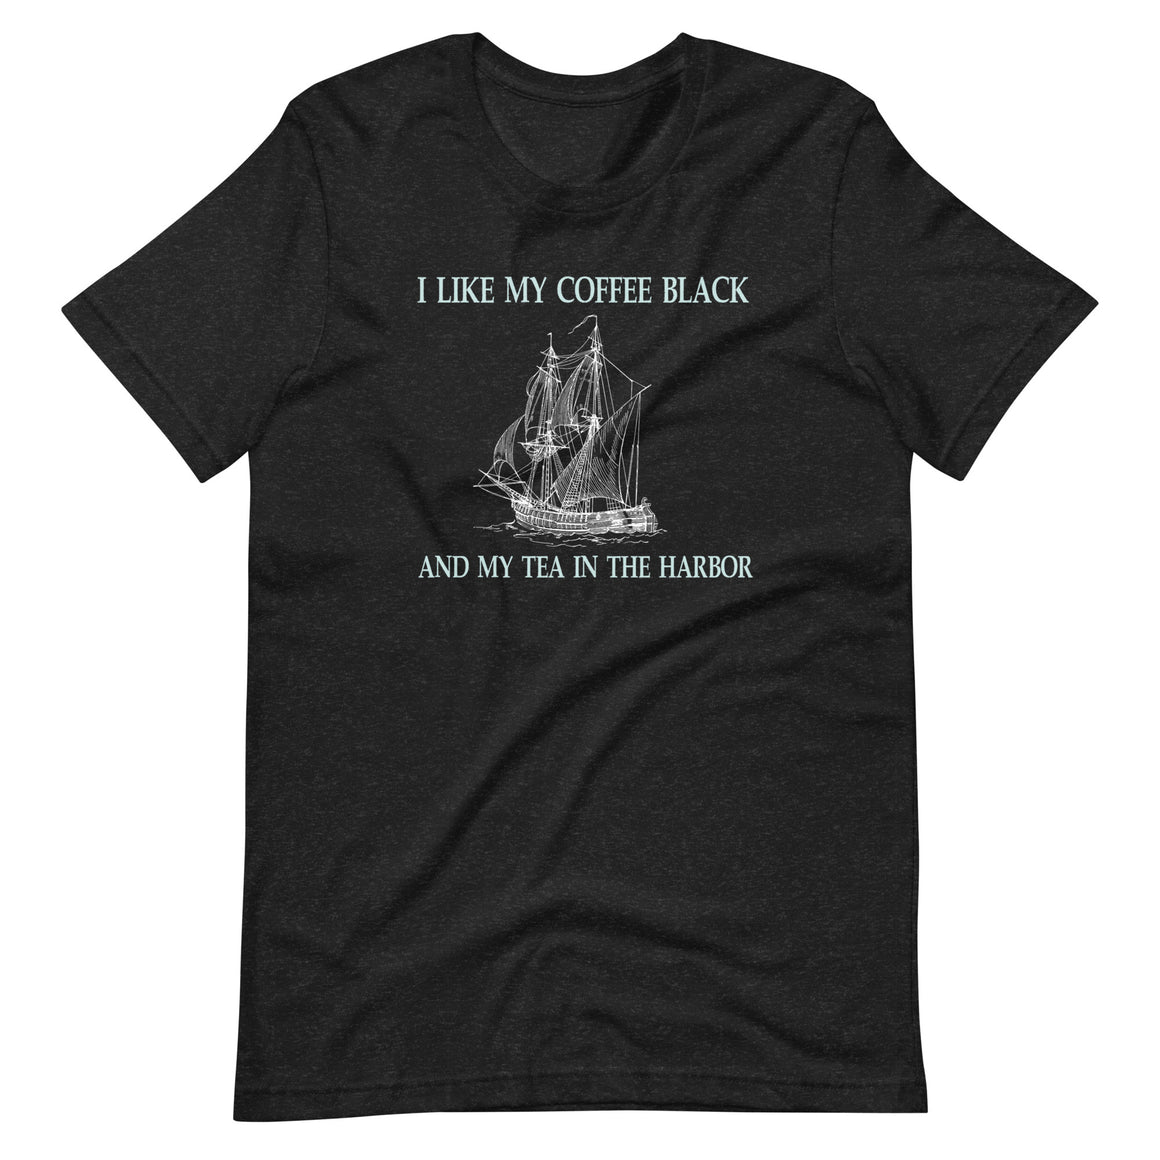 I Like My Coffee Black and My Tea in the Harbor Shirt by Libertarian Country